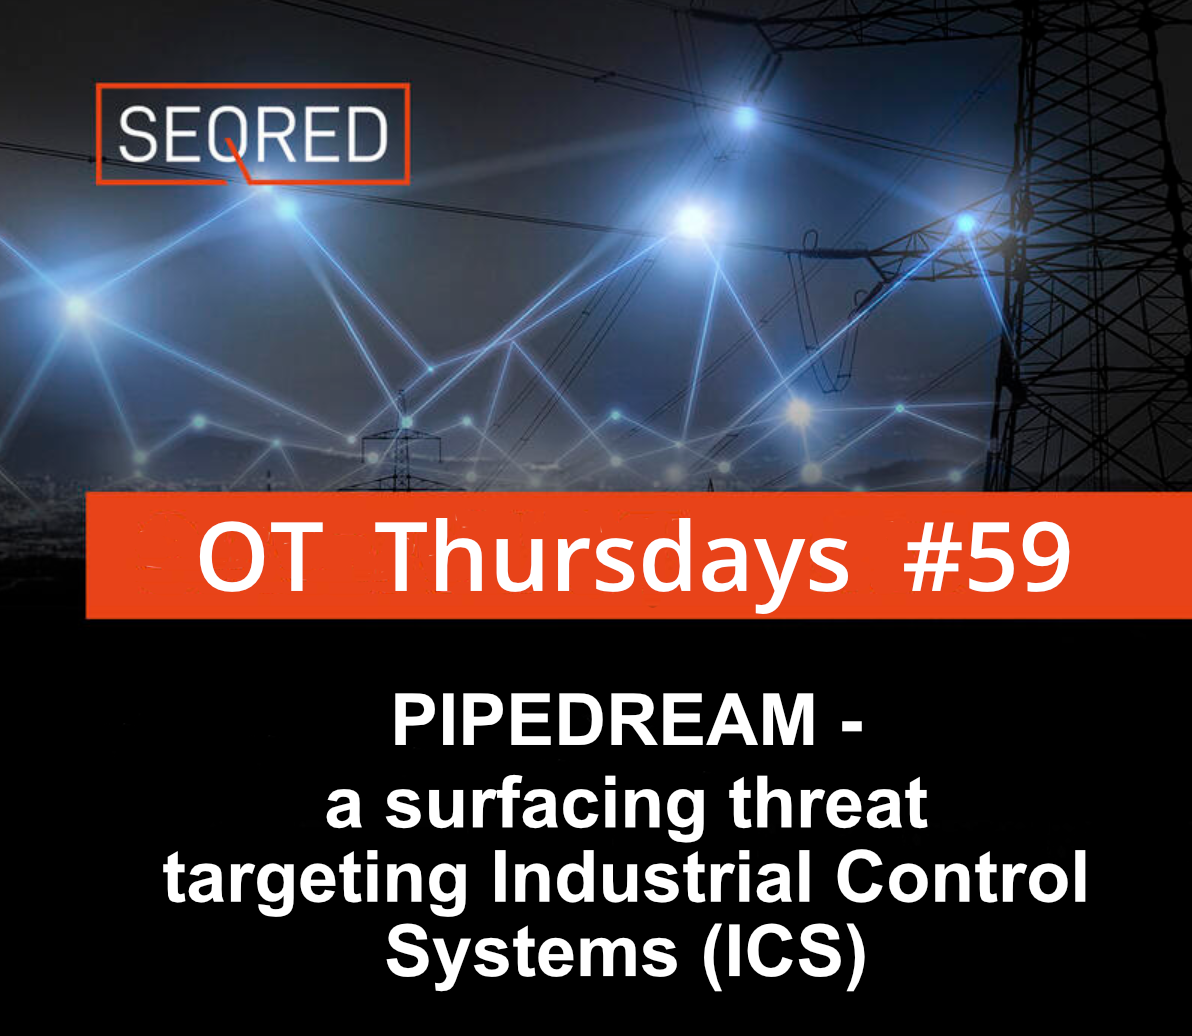 pipedream - surfacing malware  targeting industrial control systems ICS